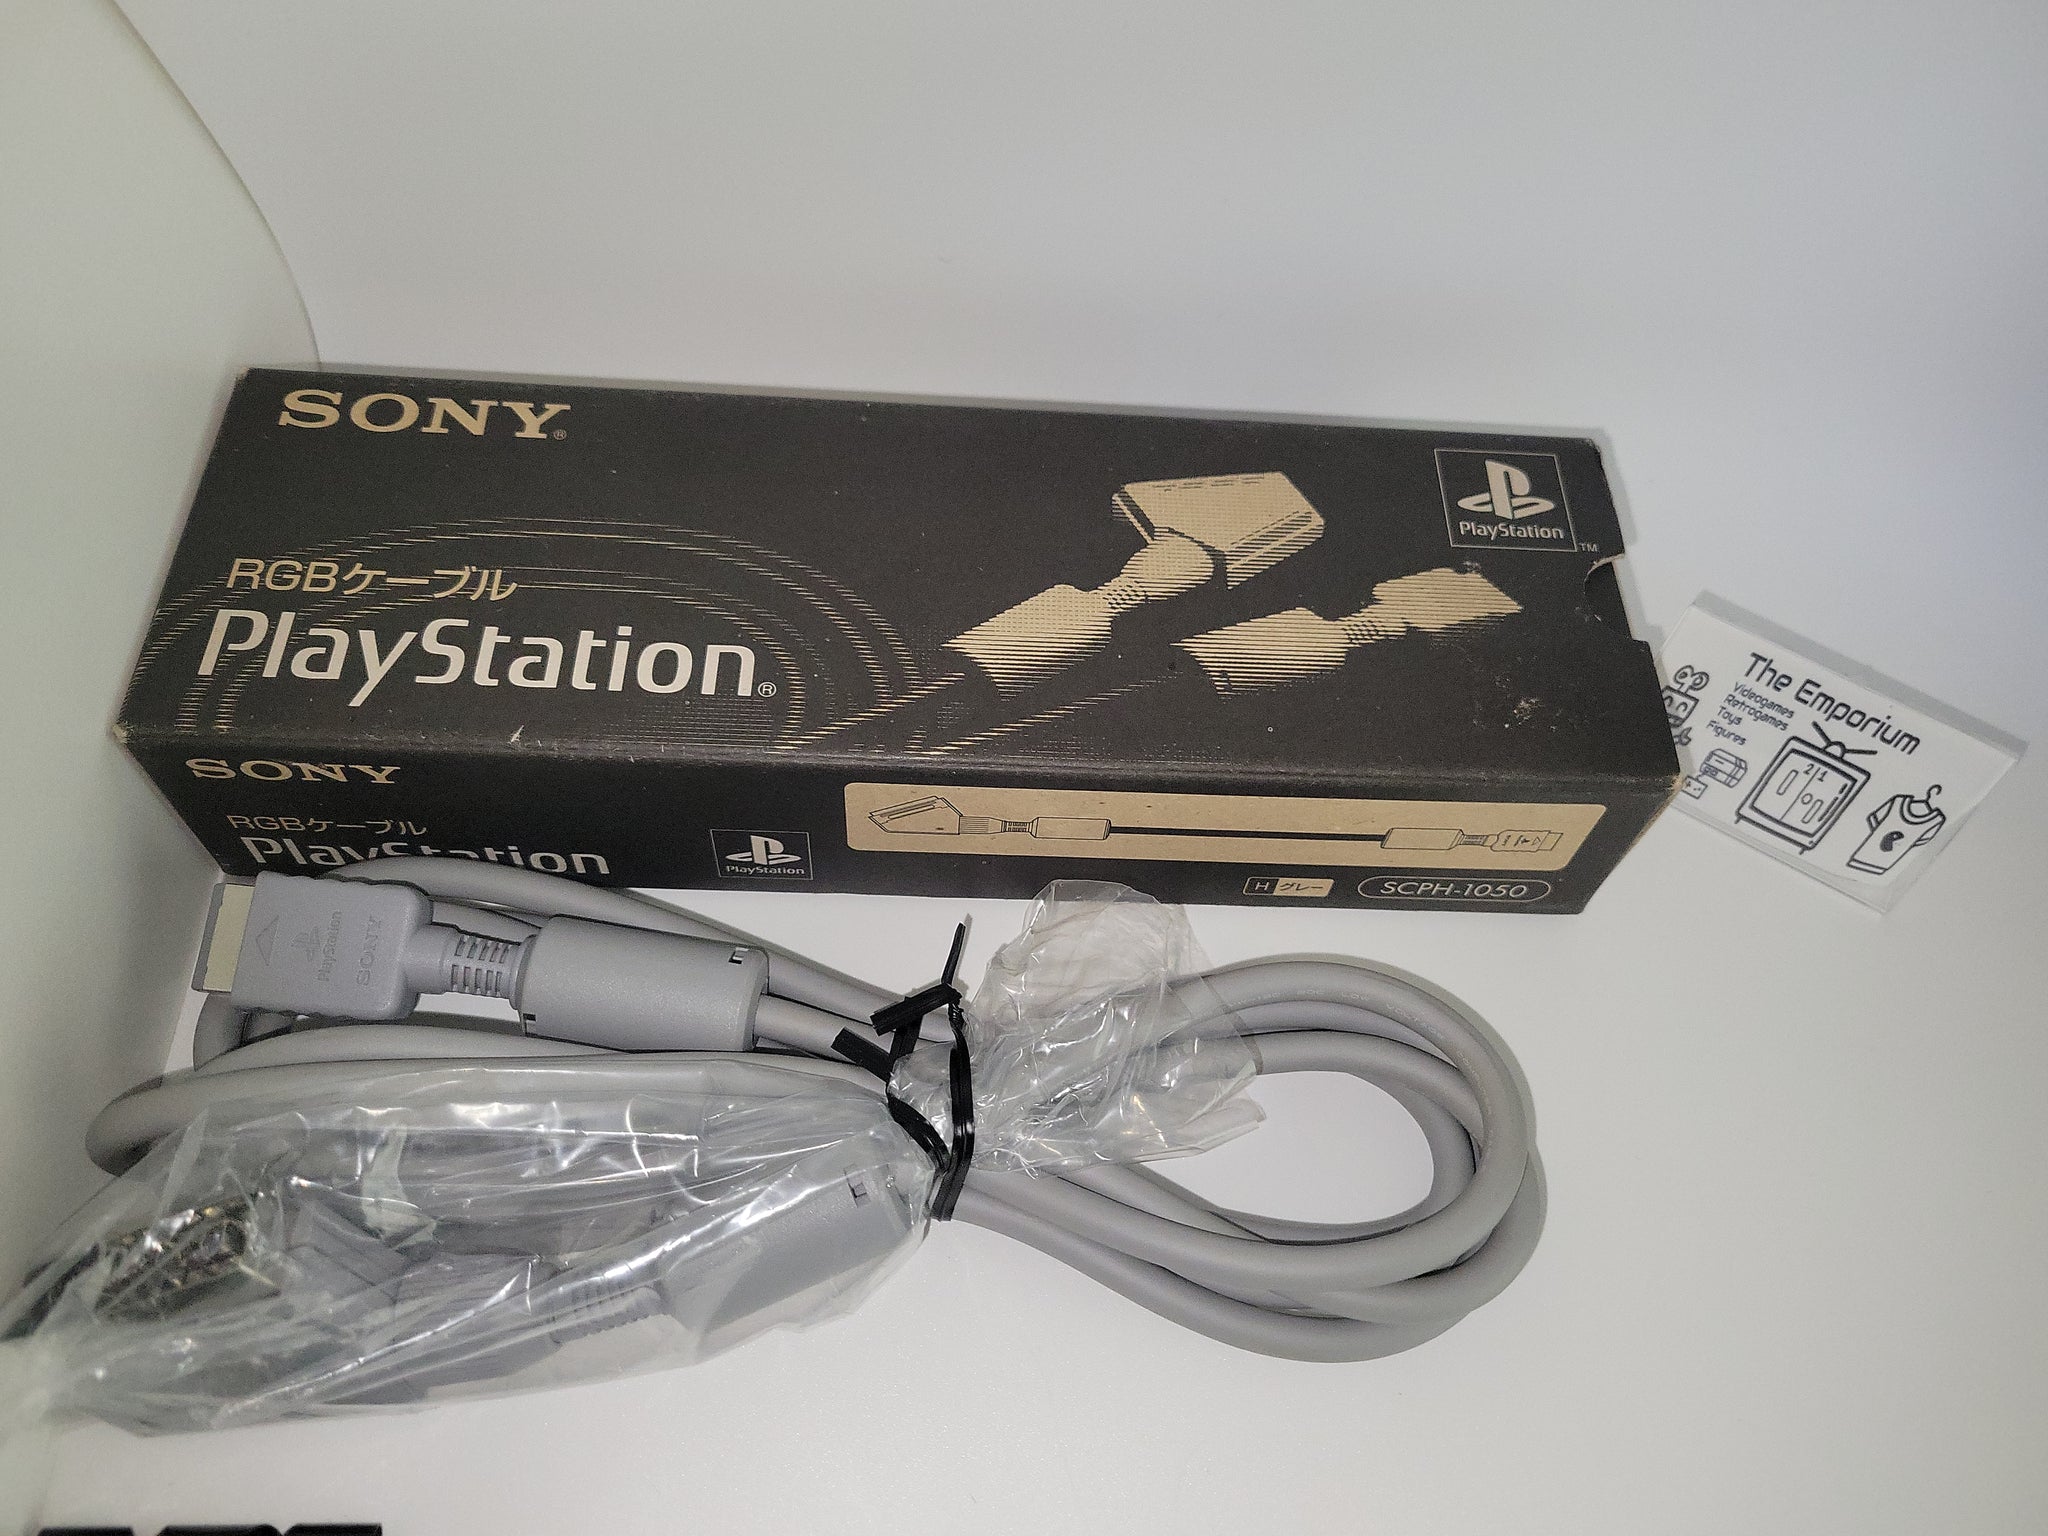 Sony Original Scph-1050 RGB (japan) Cable - Sony PS1 Playstation 